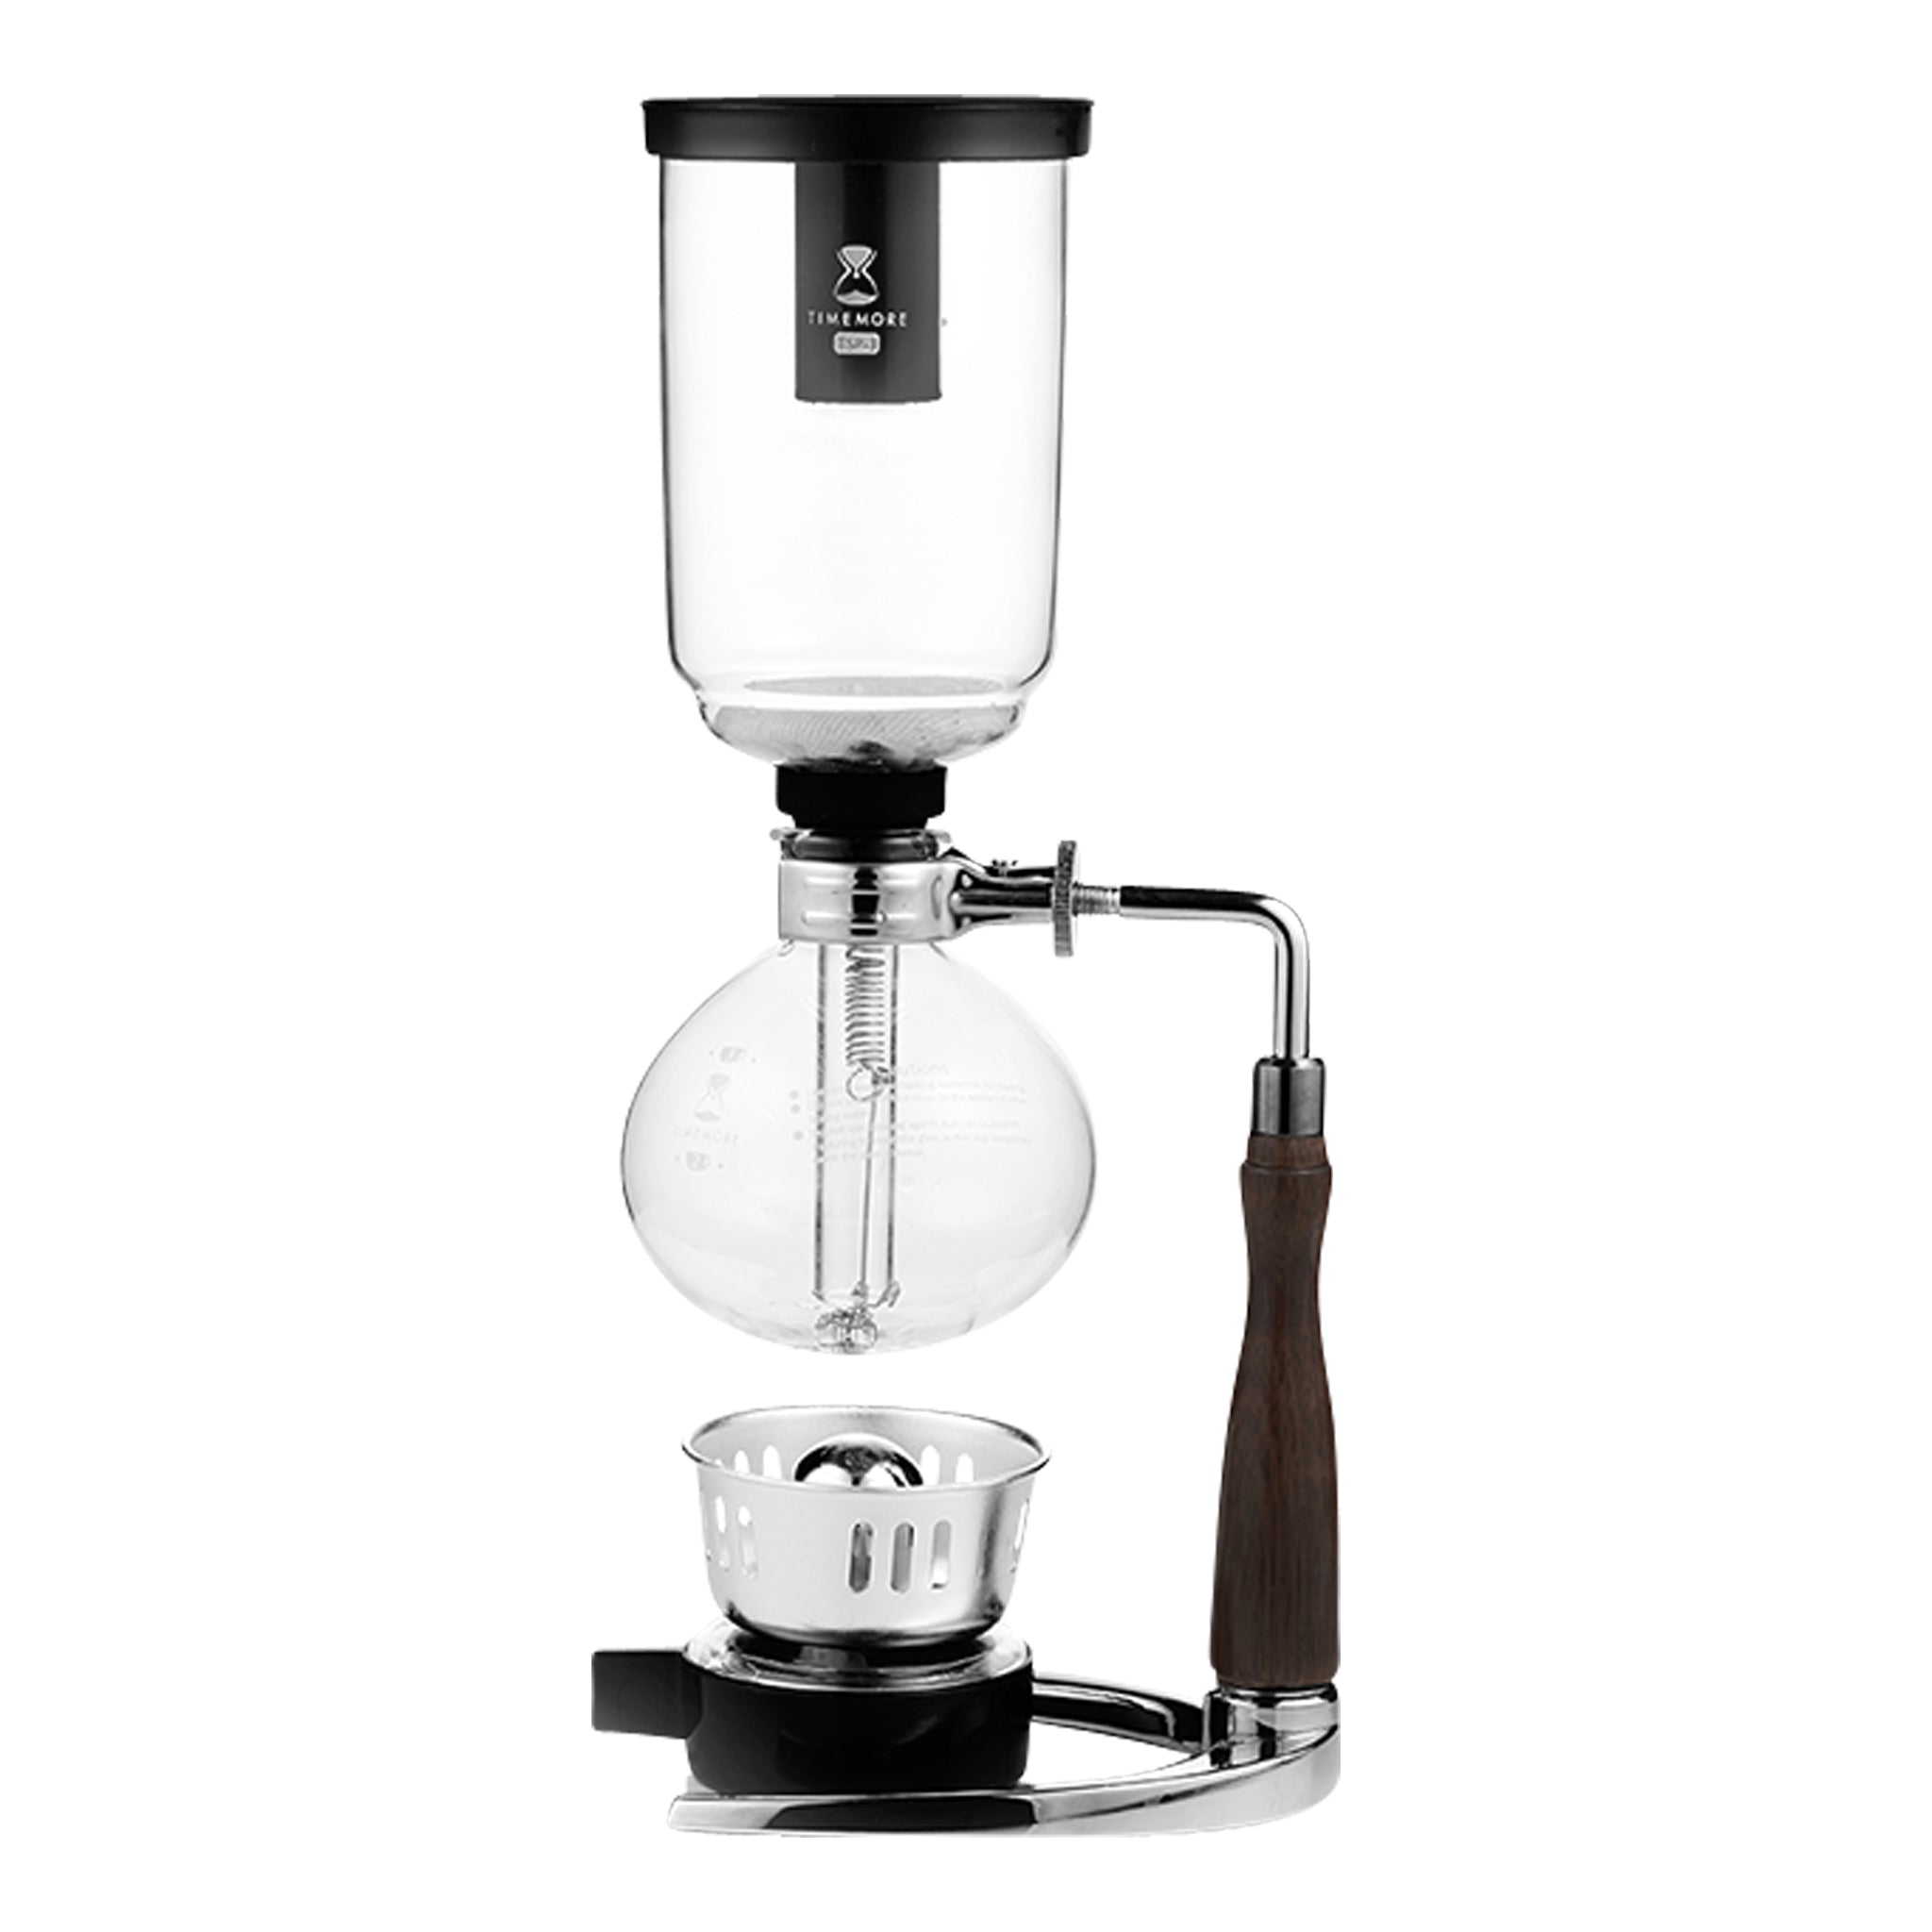 This Siphon Coffee Maker Will Give You the Smoothest Cup of Your Life